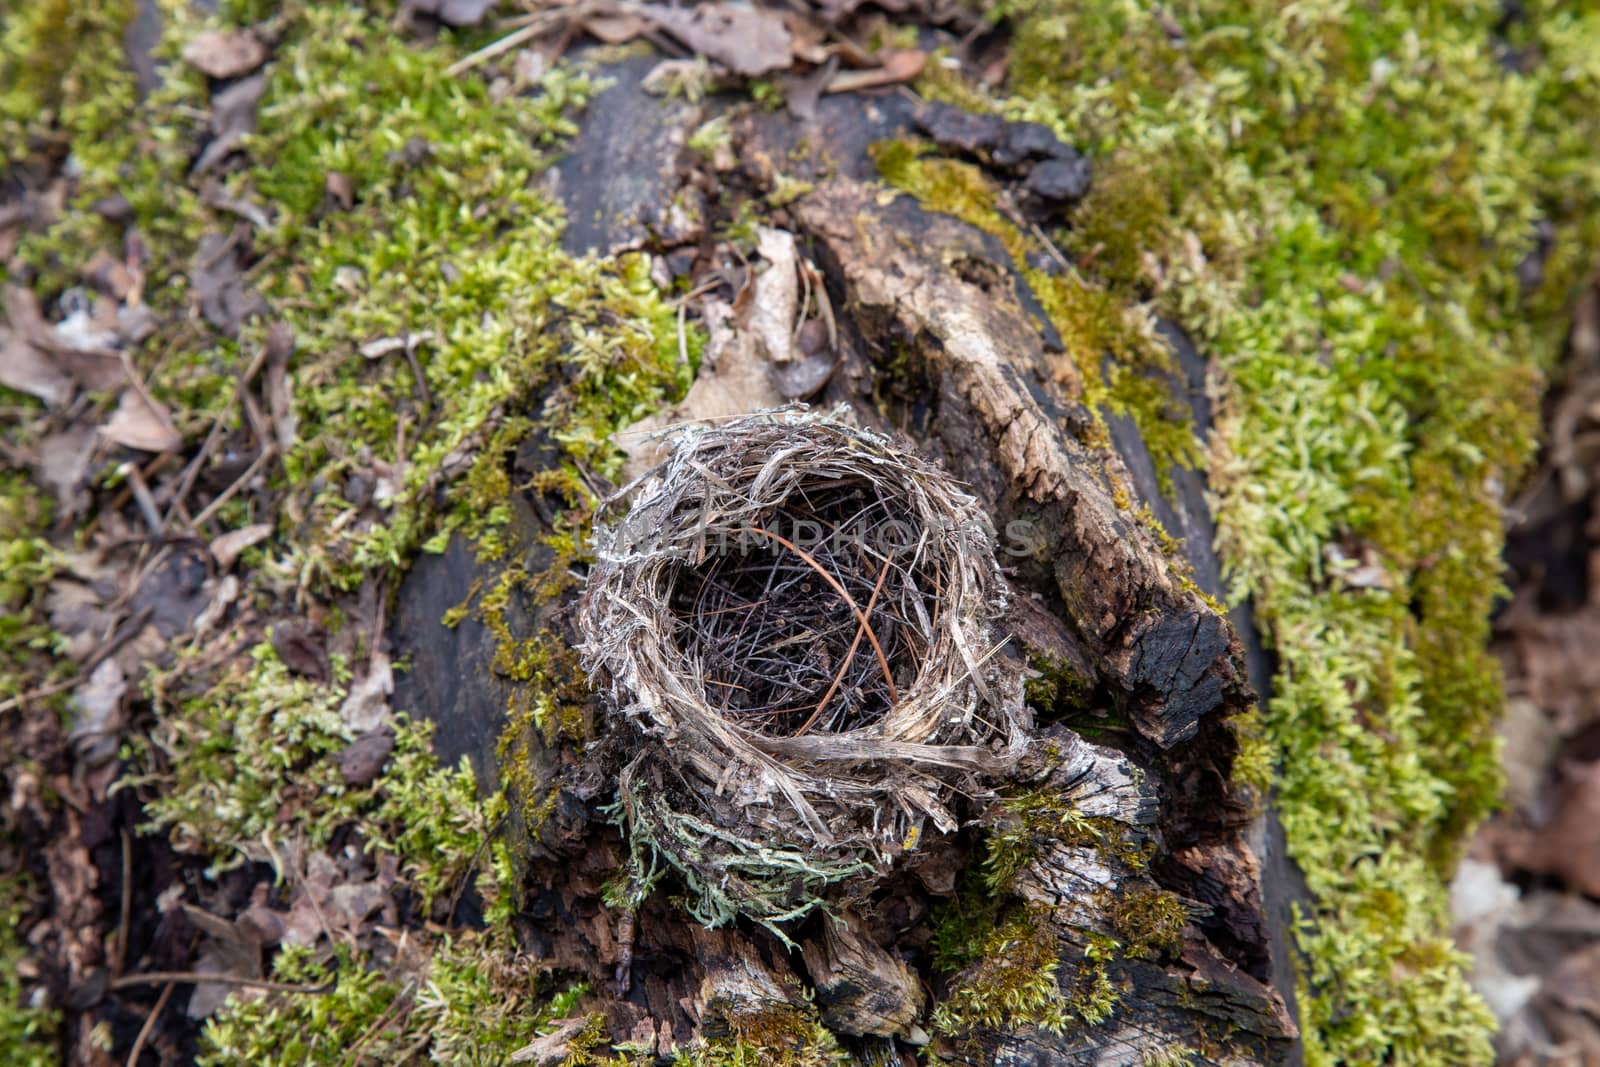 A bird's nest rests on a mossy log in the woods.